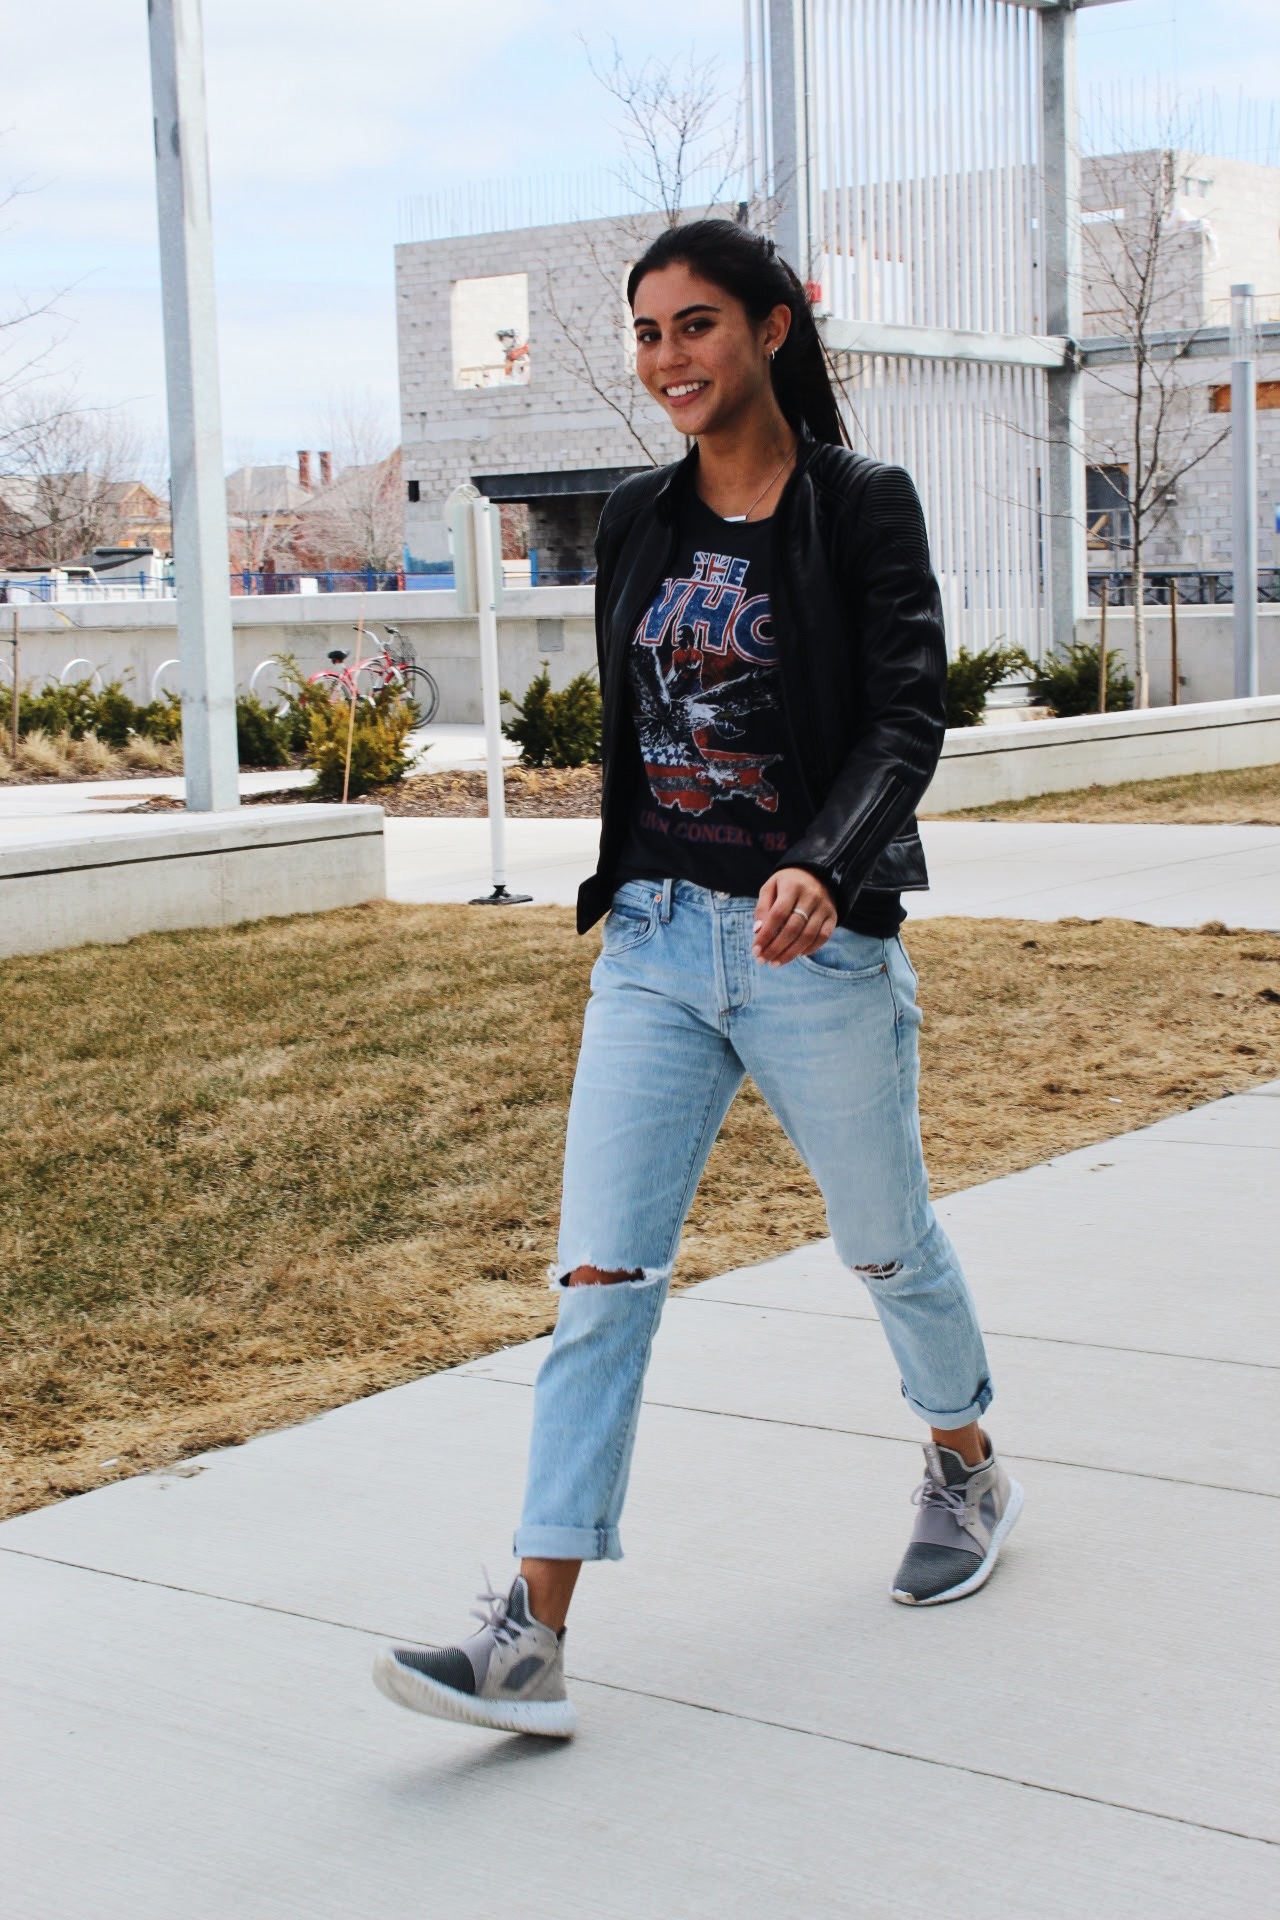 ani, FashionHumber, campus street style, Humber College, Fashion student,  7 for all mankind jacket, Junk food t shirt, Tiffany and co ring